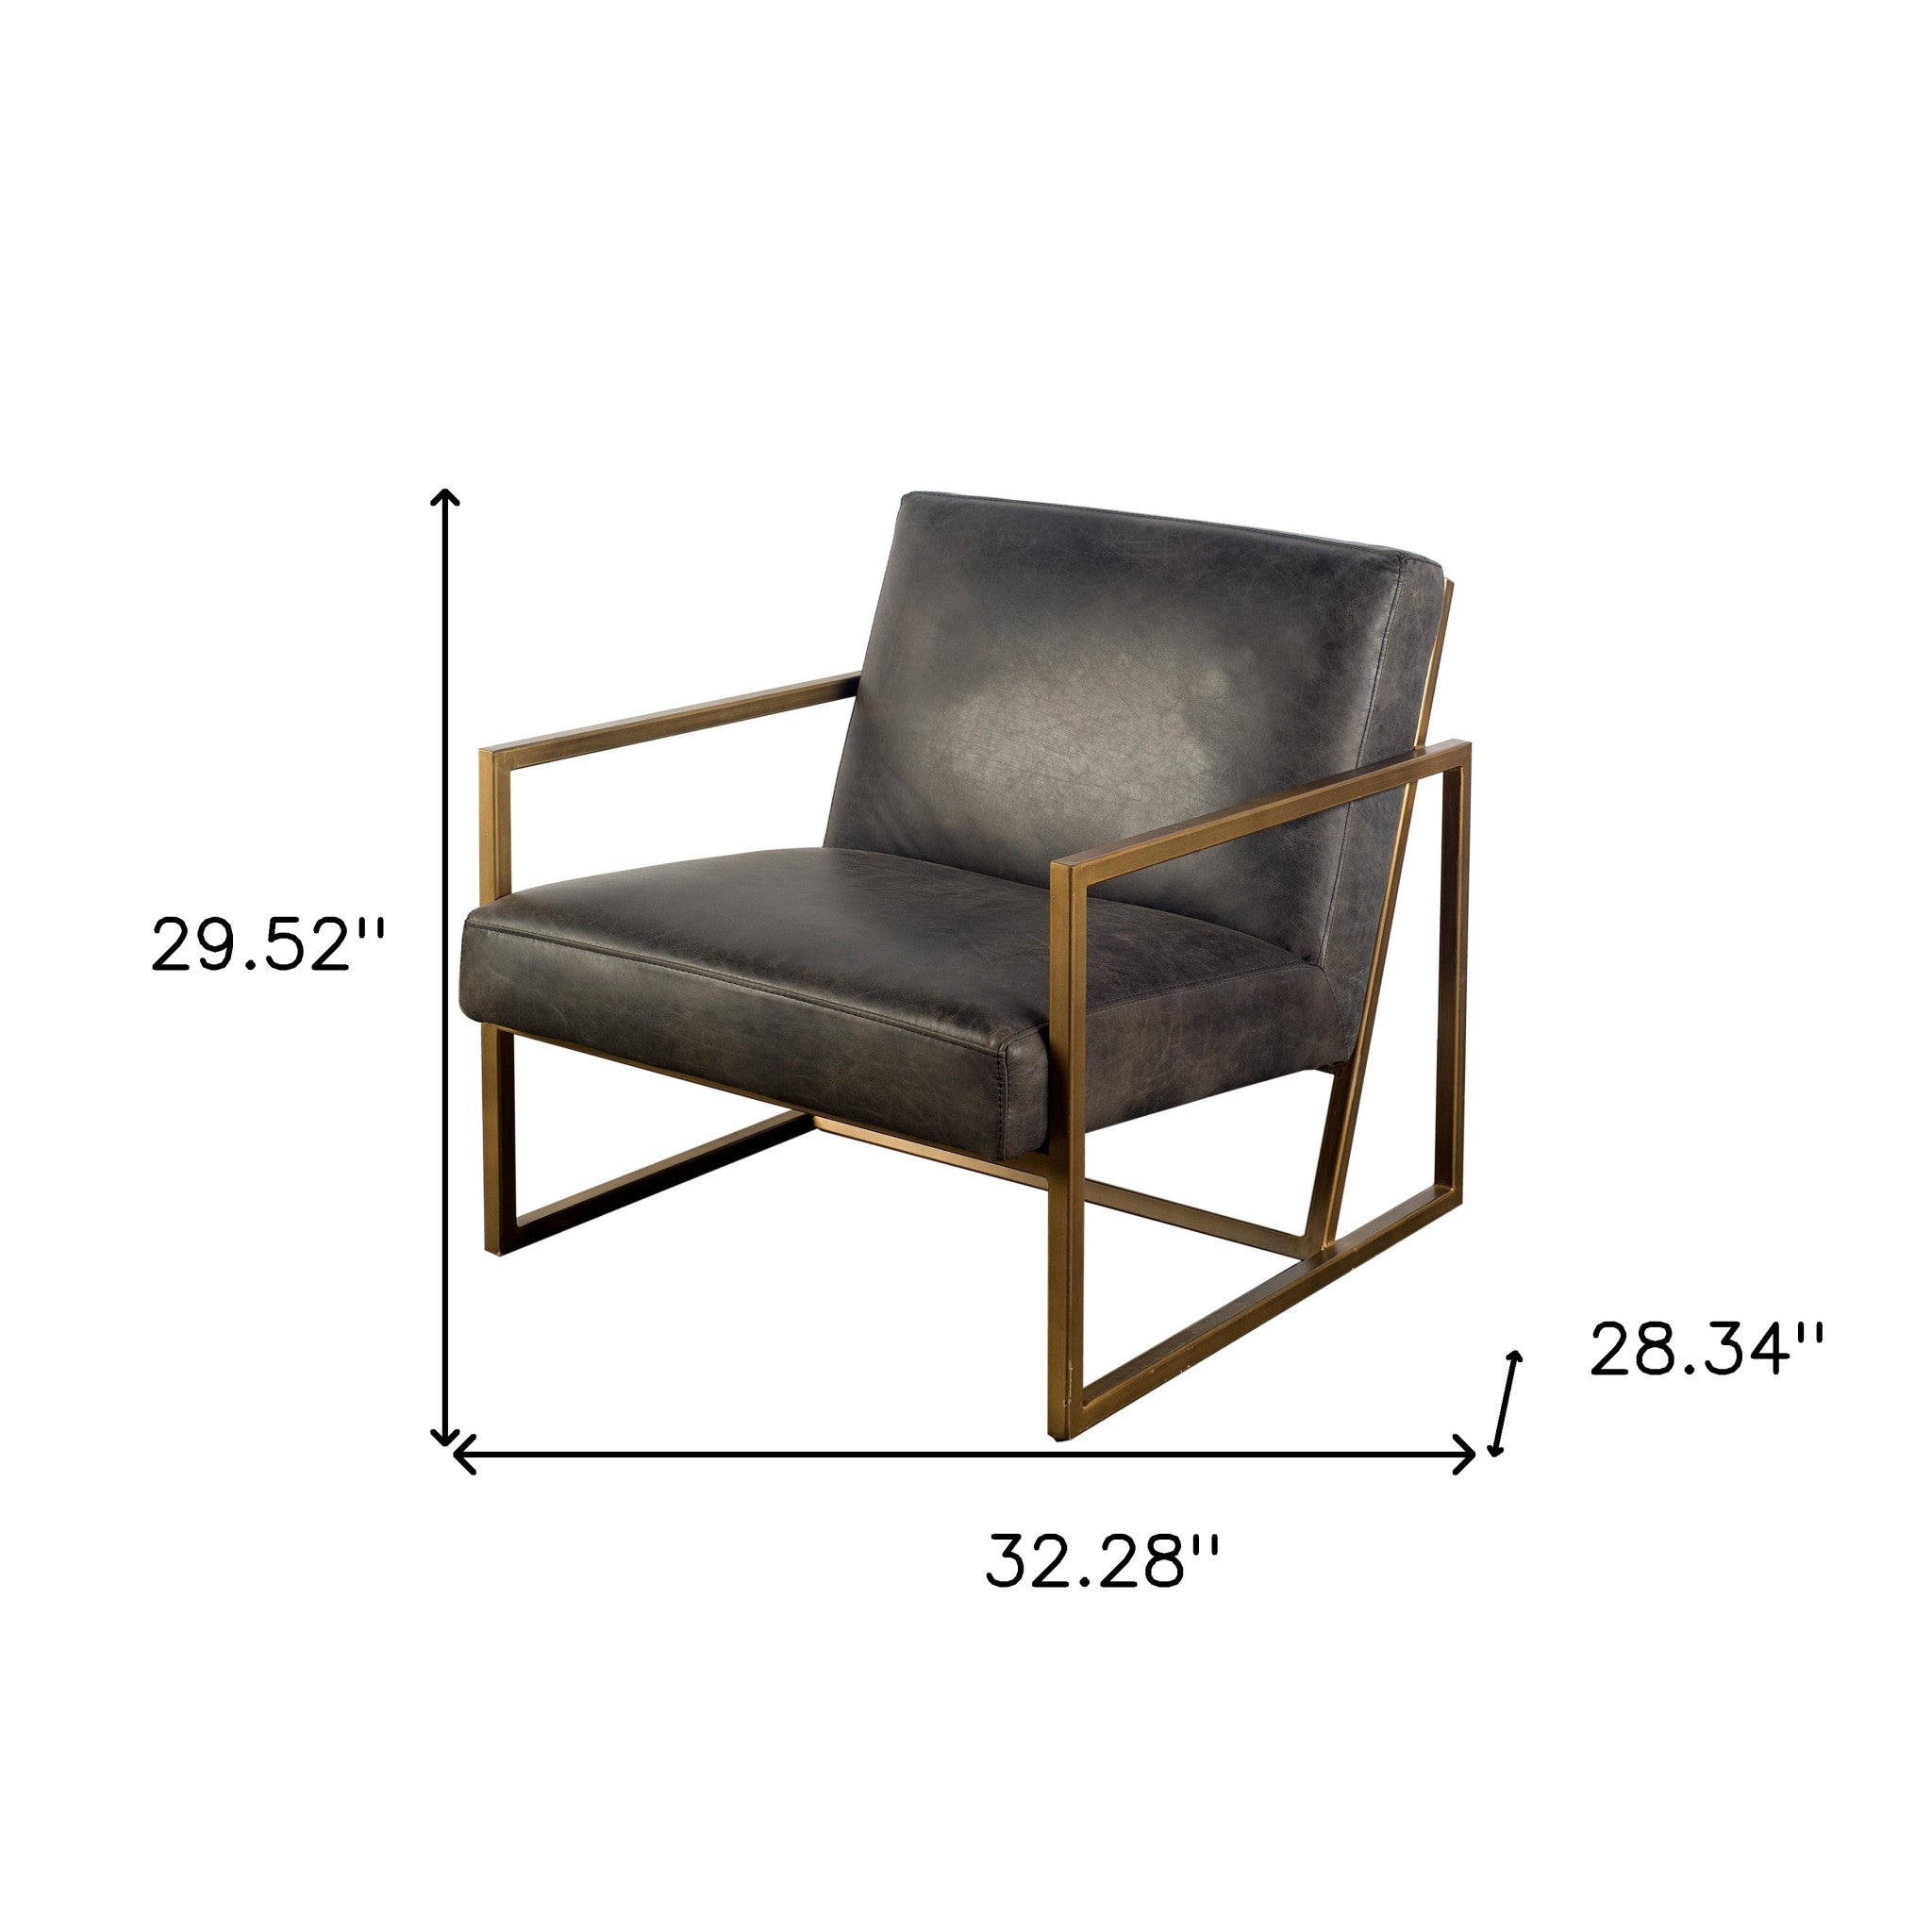 Black Leather Seat Accent Chair With Gold Metal Frame